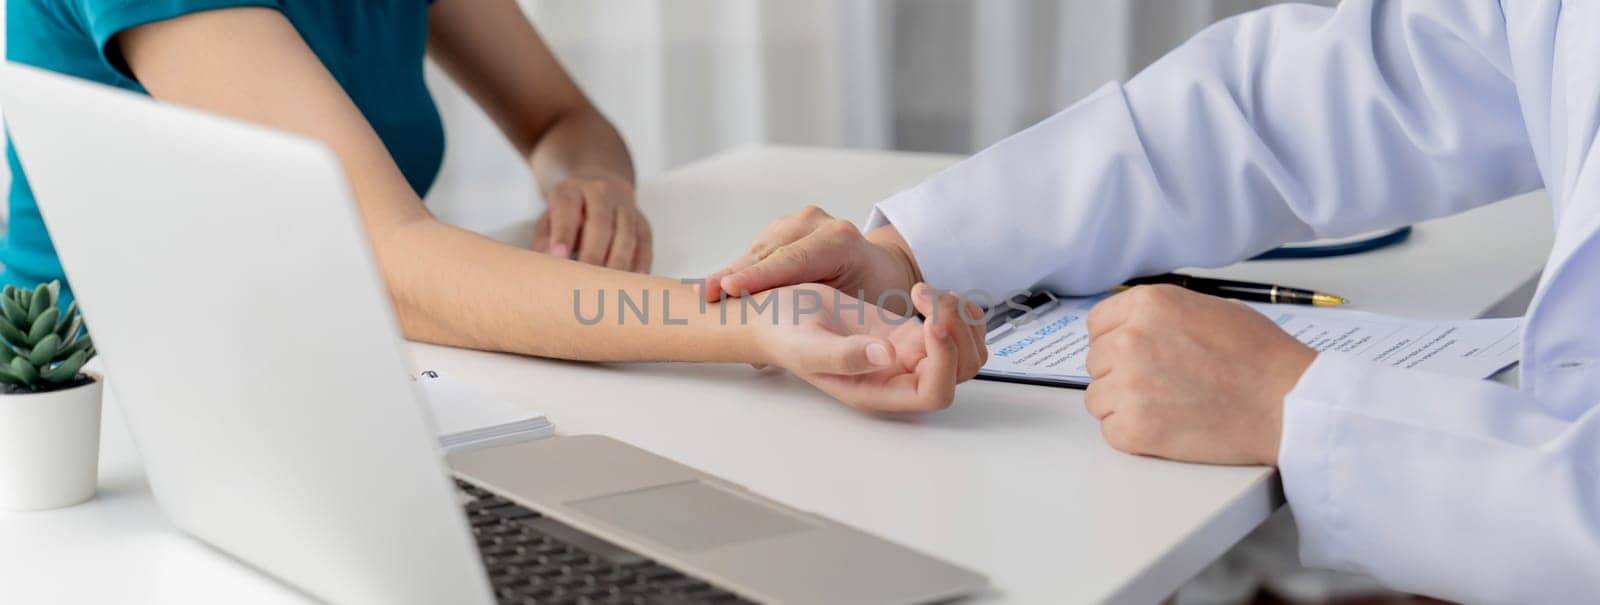 Patient attend doctor's appointment at clinic or hospital office. Doctor discusses medical treatment option, examining and diagnosis symptoms while checking the patient's pulse. Panorama Rigid